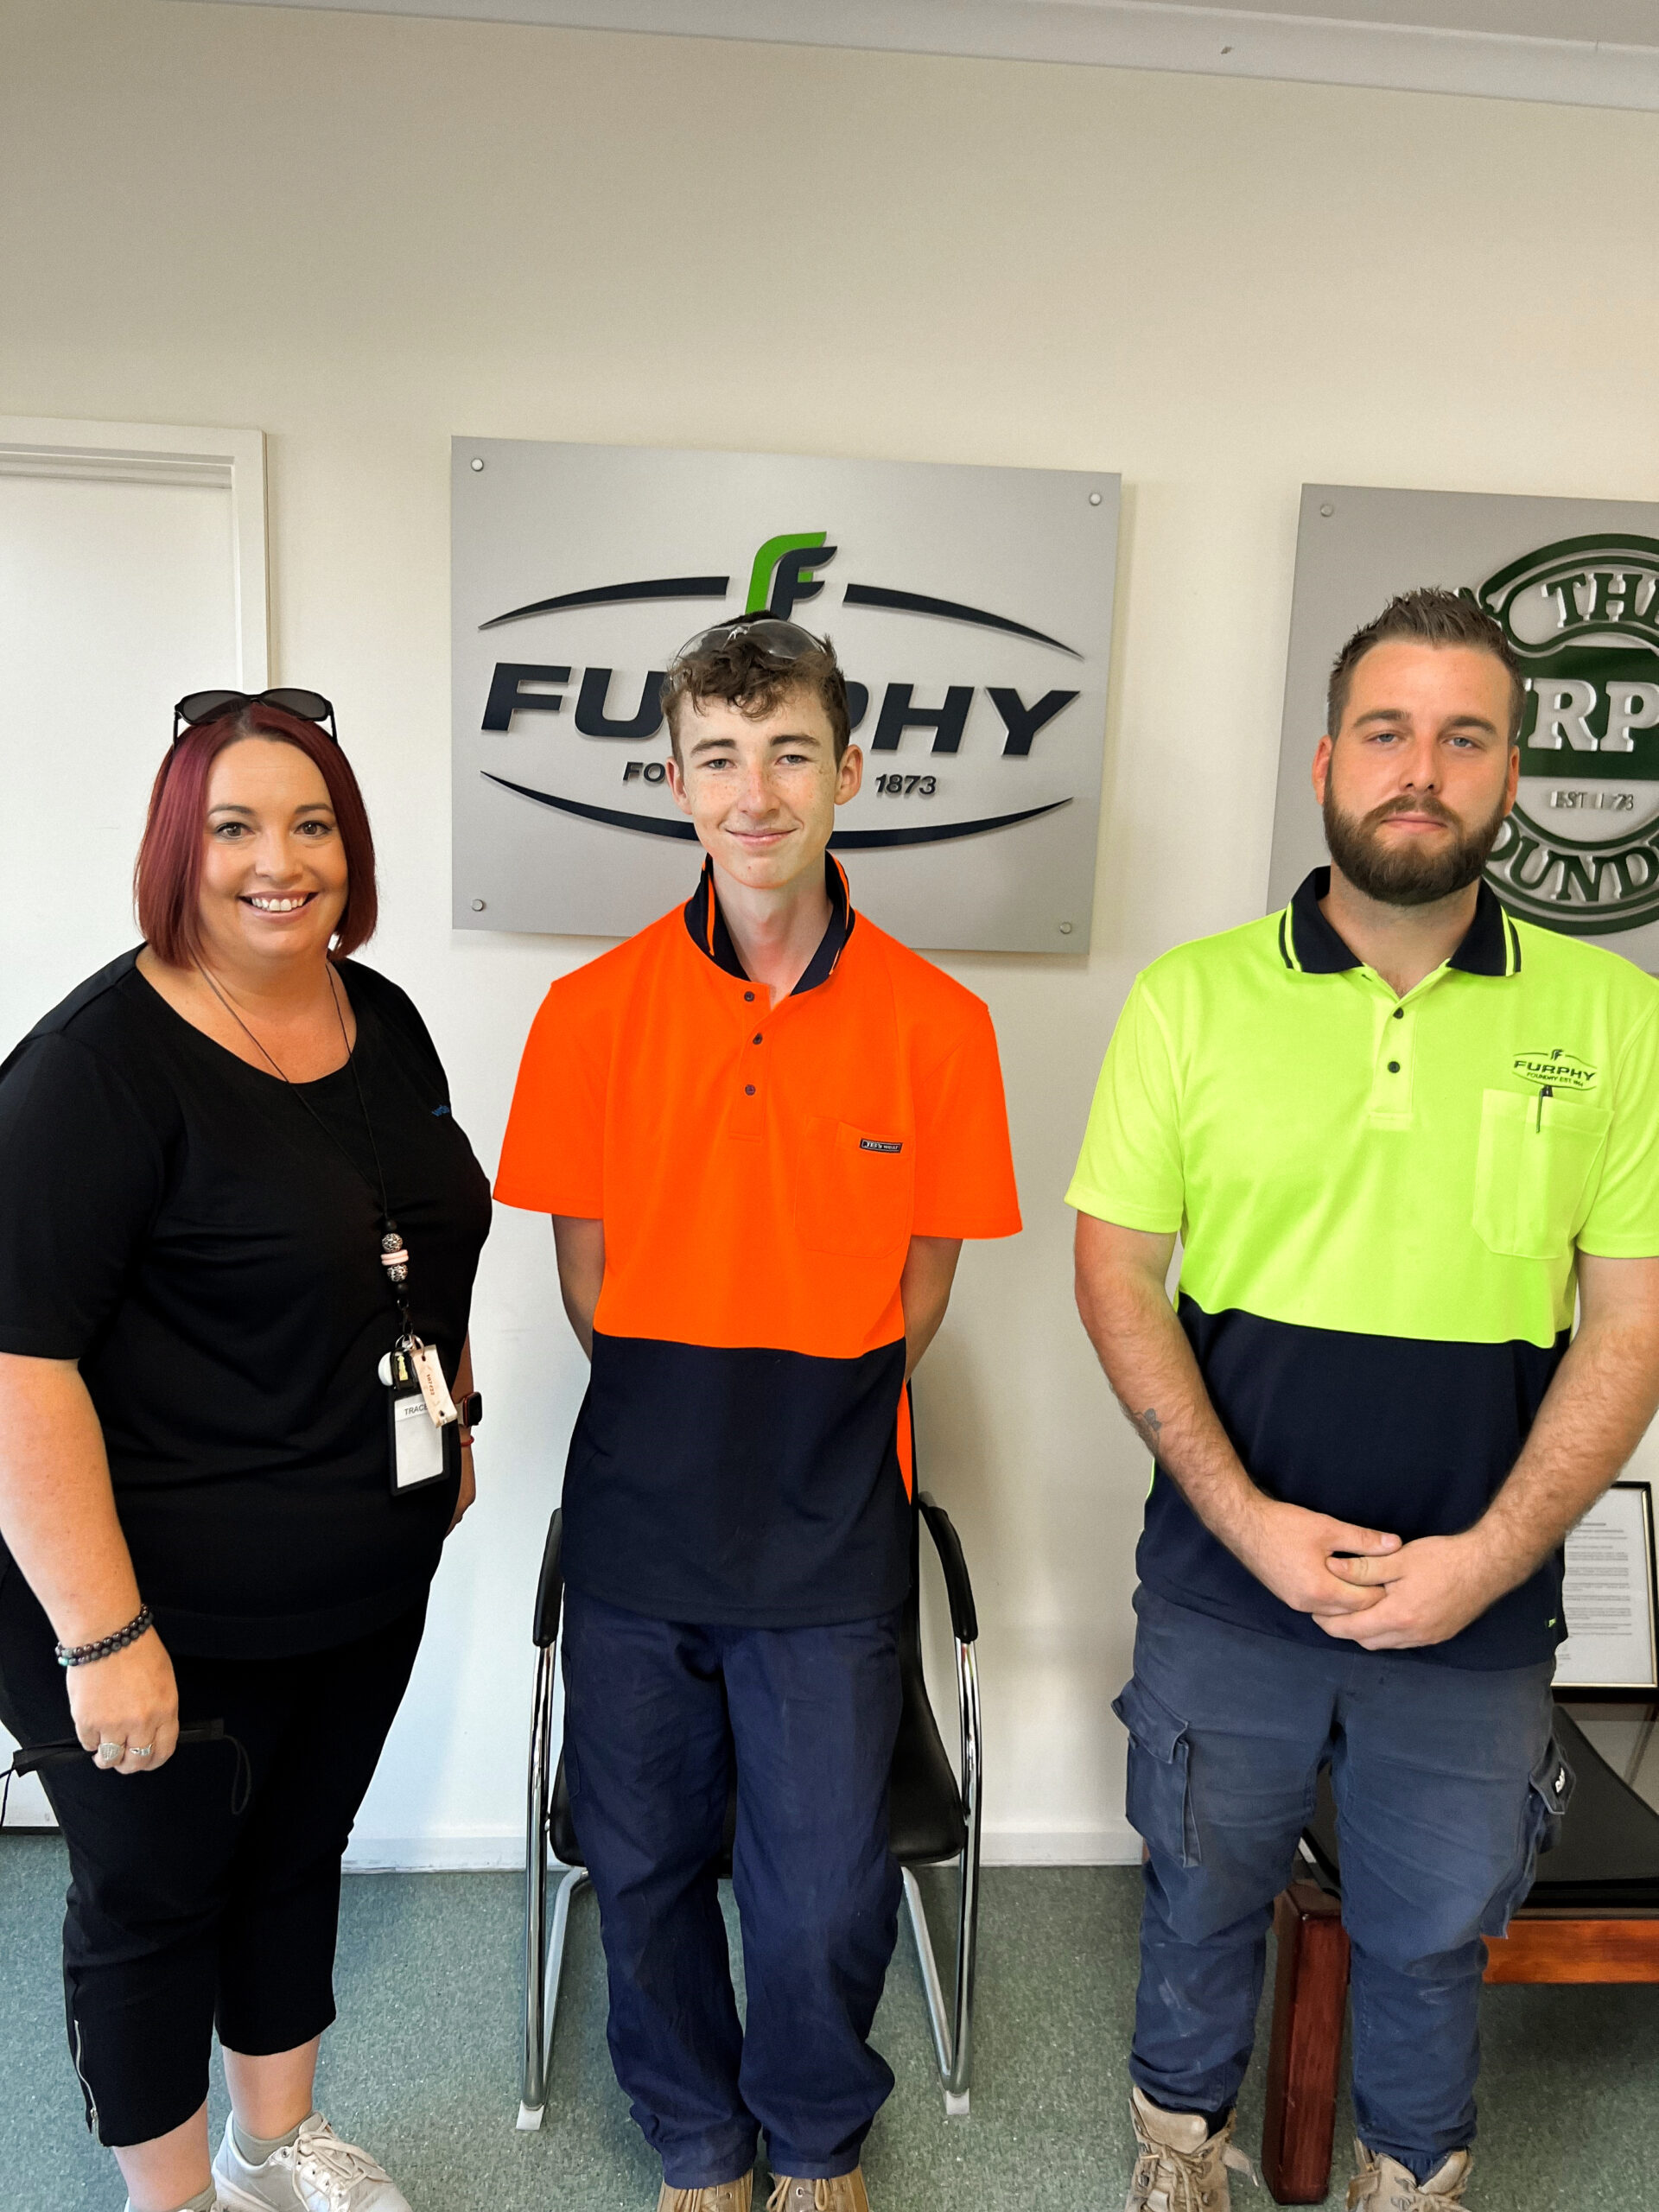 Reiley’s Furphy Foundry Work Experience